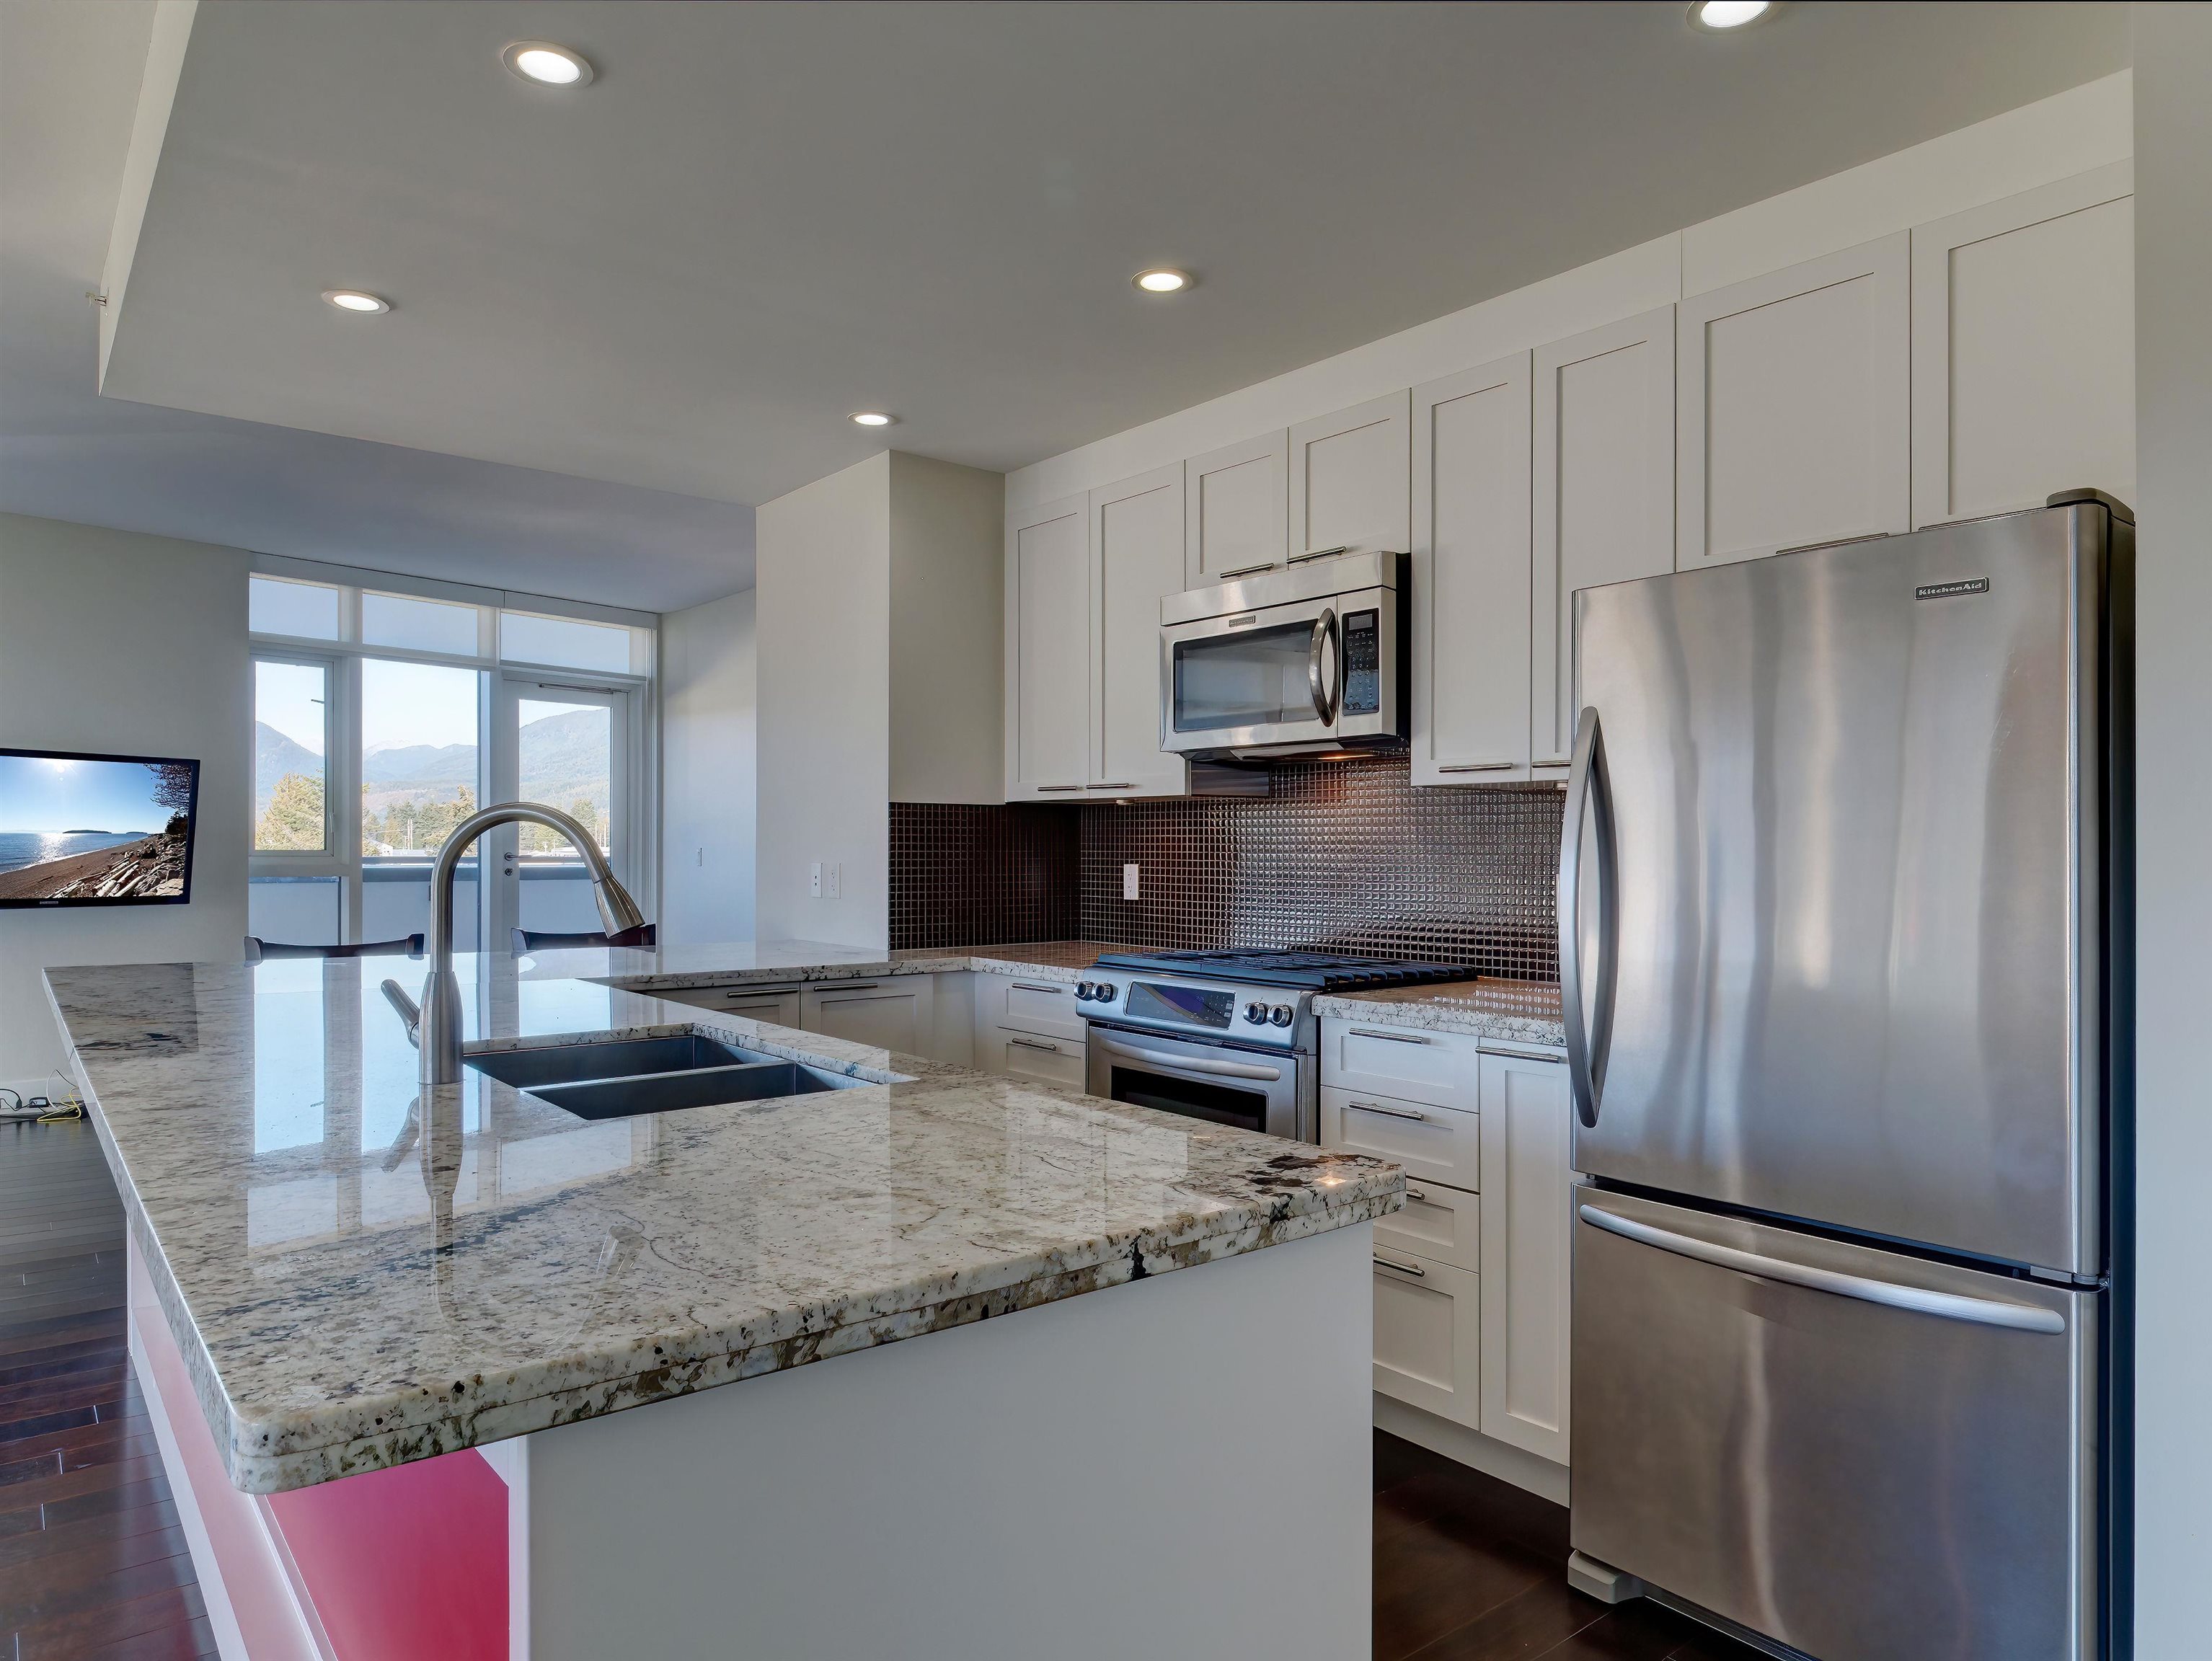 Granite counter, modern stainless appliances. You'll always be in the conversation in this spacious open floor plan, while guests cozy up to the wrap-around sit up bar which would comfortably seat six people. Great for entertaining.